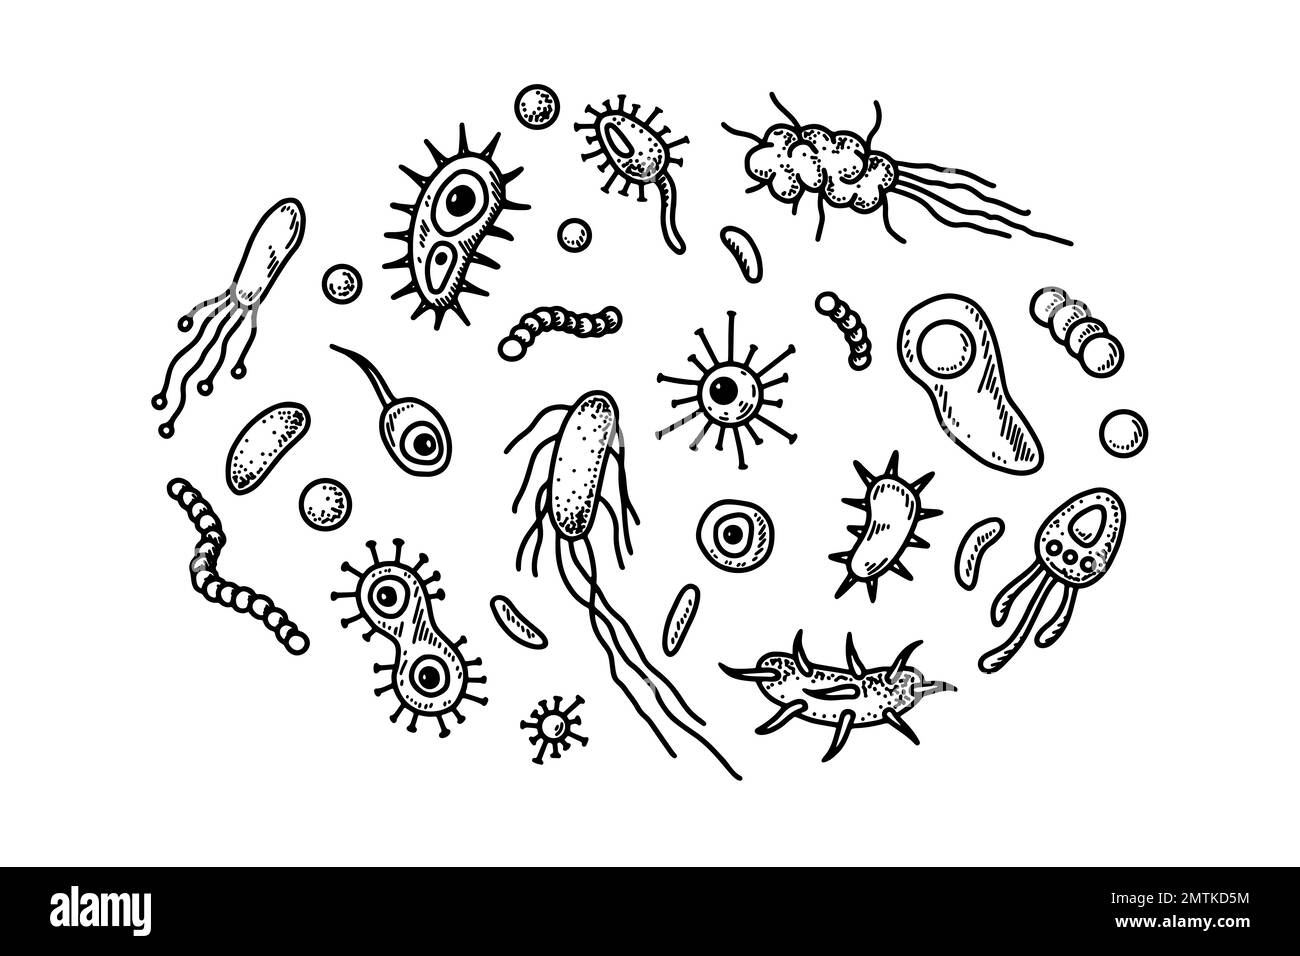 Set of hand drawn bacterias and microorganisms. Vector illustration in sketch style. Realistic microbiology scientific design Stock Vector